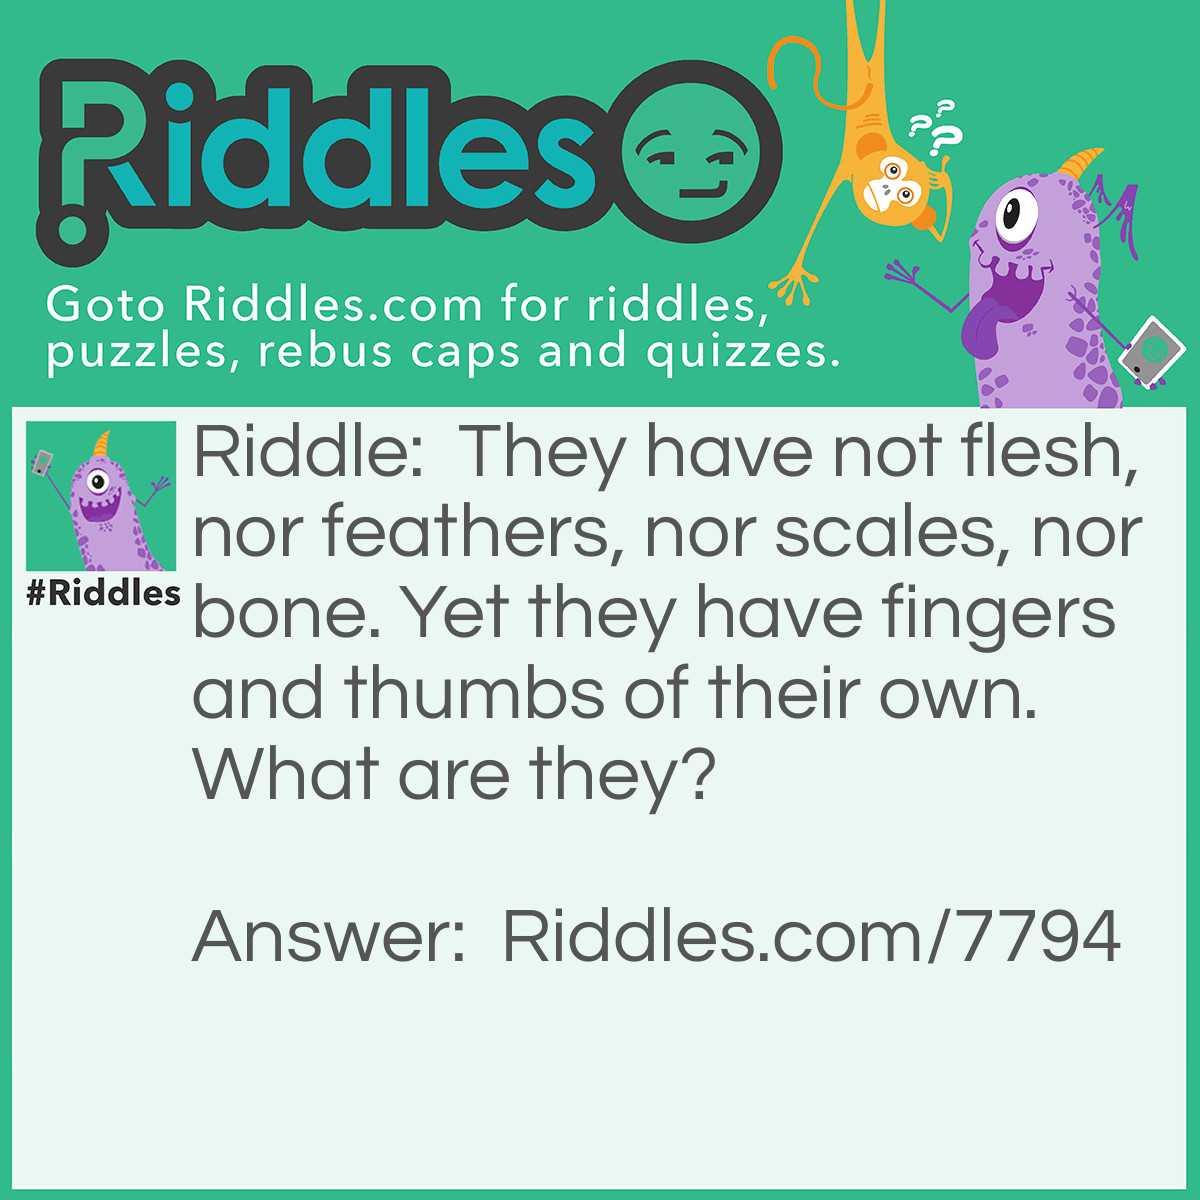 Riddle: They have not flesh, nor feathers, nor scales, nor bone. Yet they have fingers and thumbs of their own. What are they? Answer: Gloves